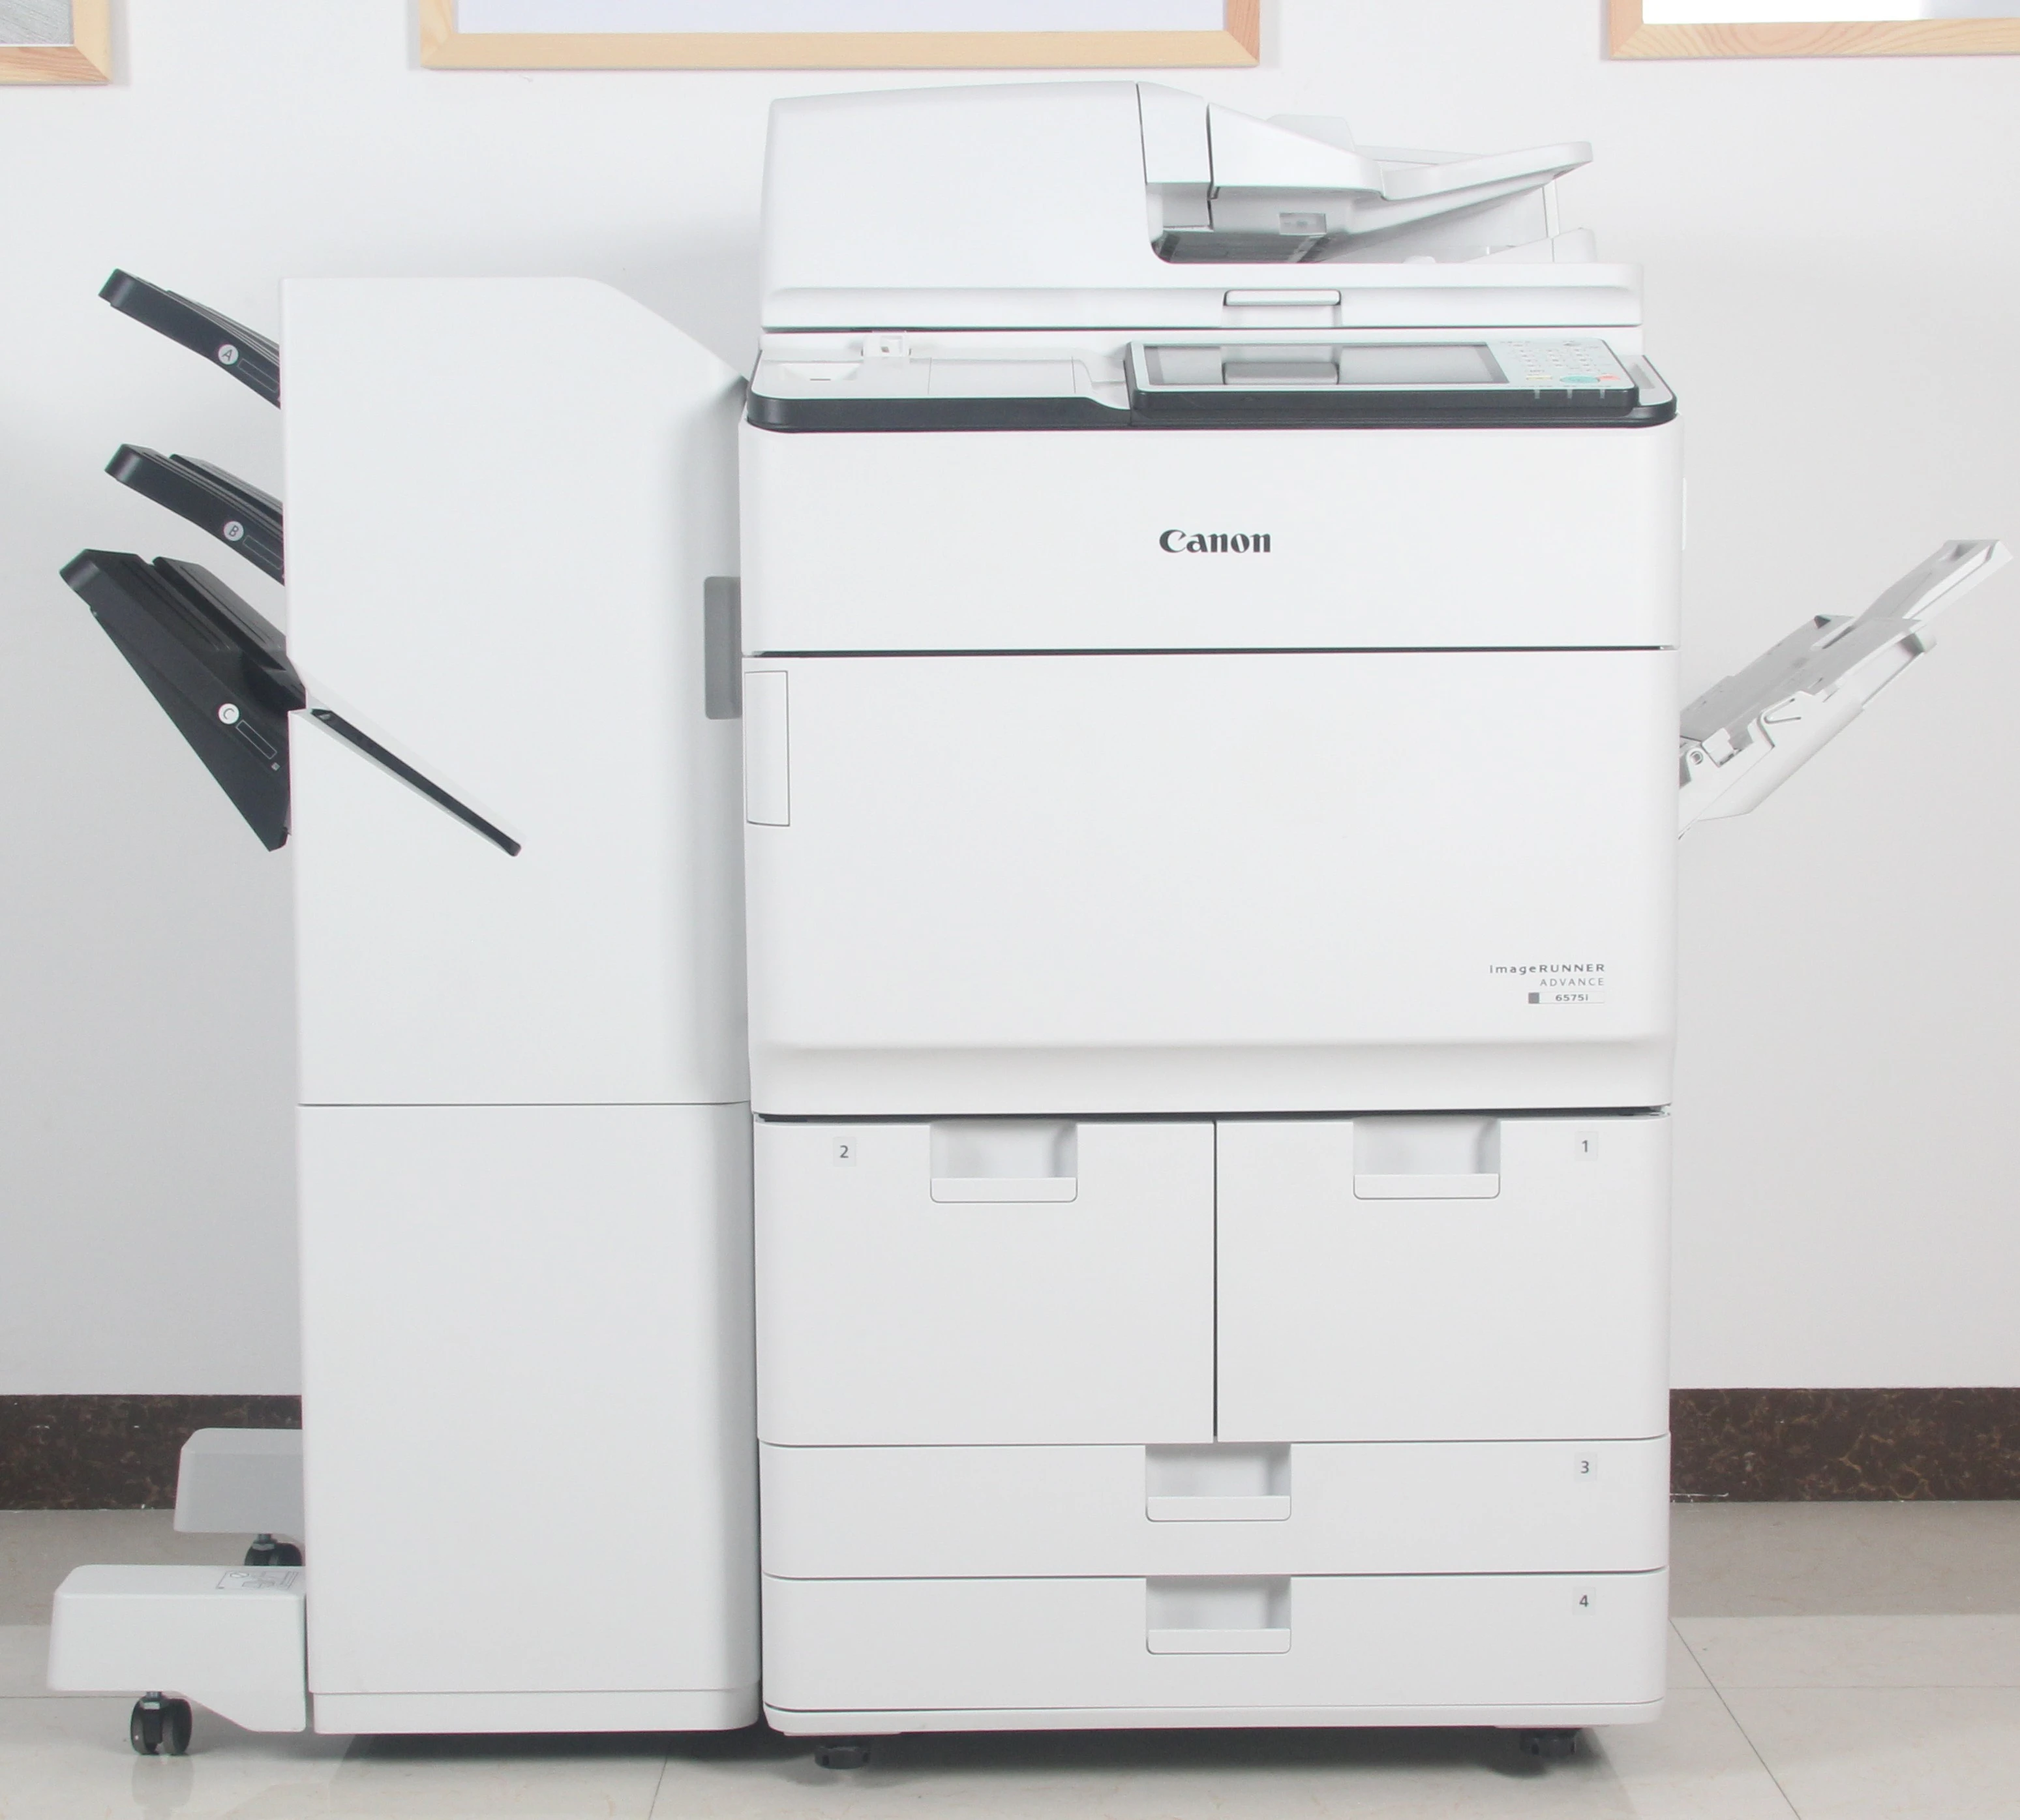 Hot selling refurbished copiers IR-6555 Used Photocopy Machine FOR Canon